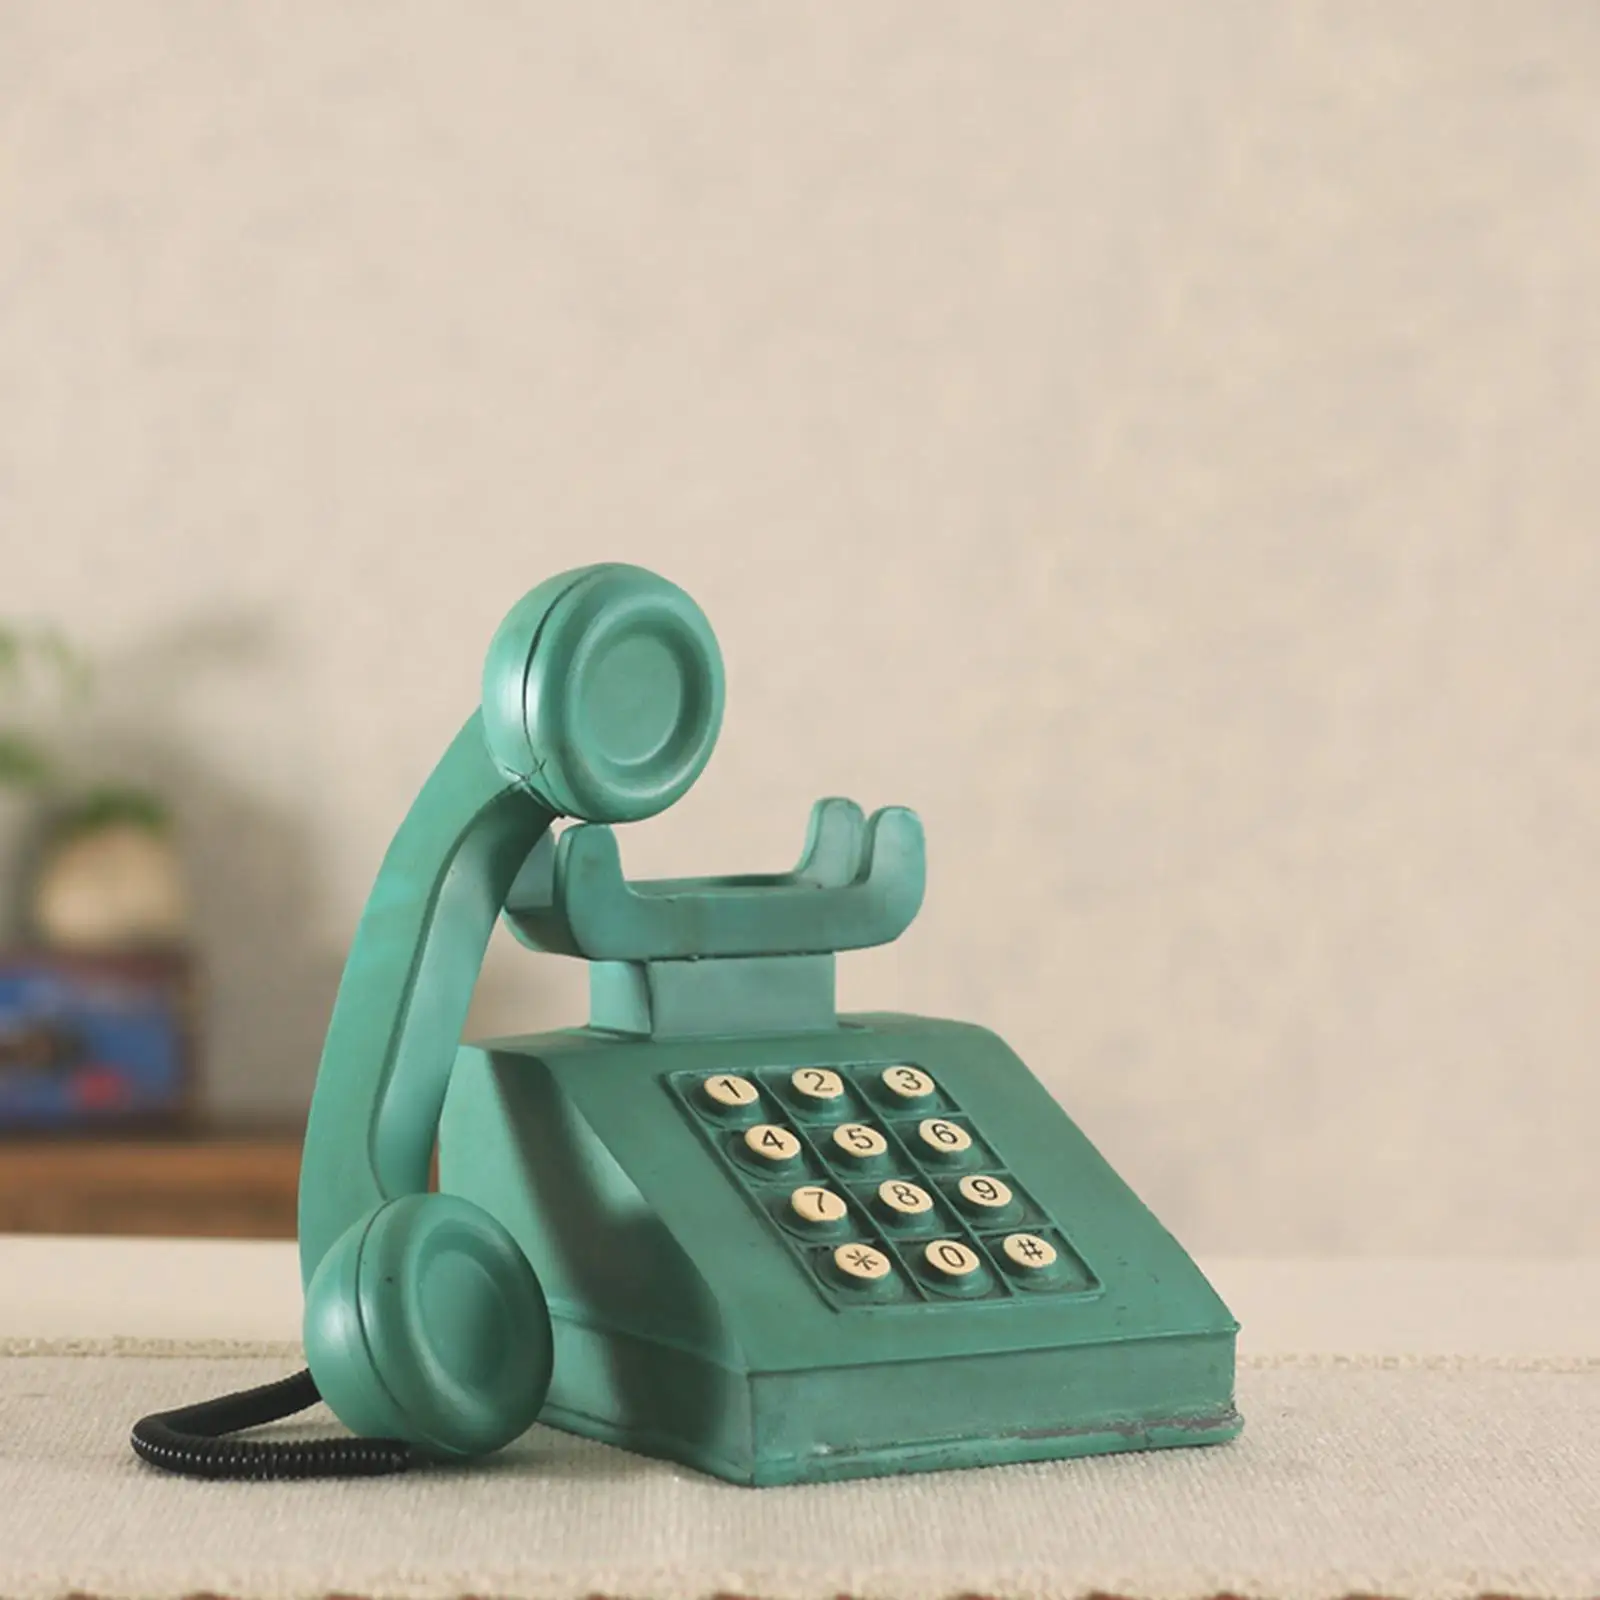 Creative American Telephone Model Figurine for Store Office Decoration